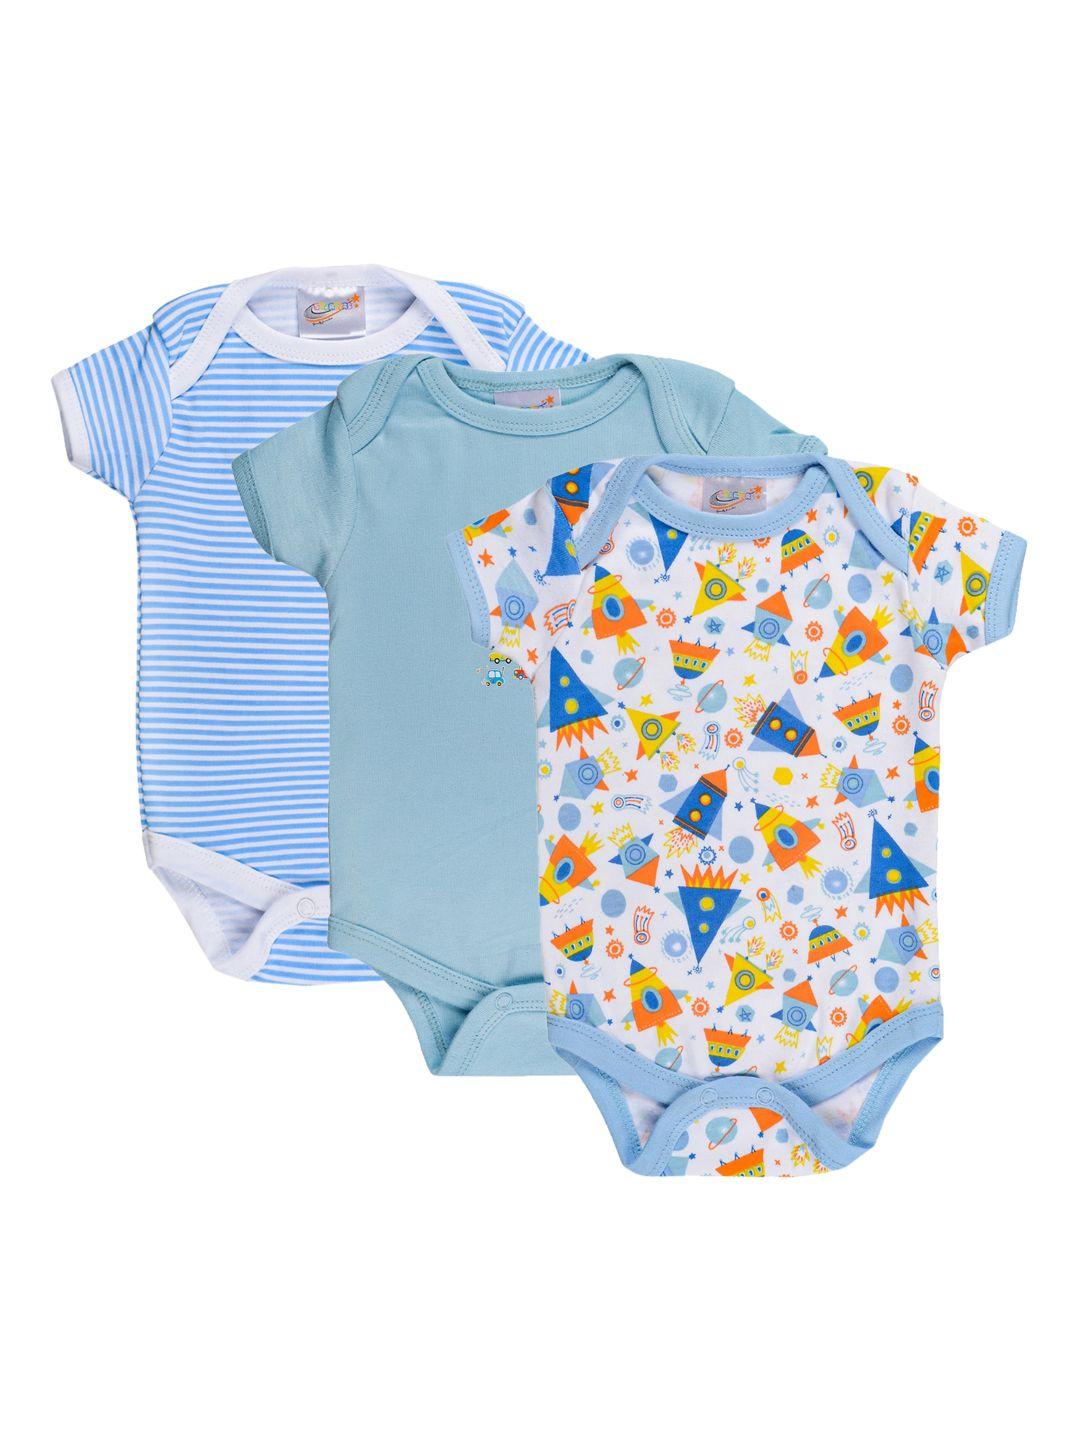 starters kids set of 3 printed cotton rompers